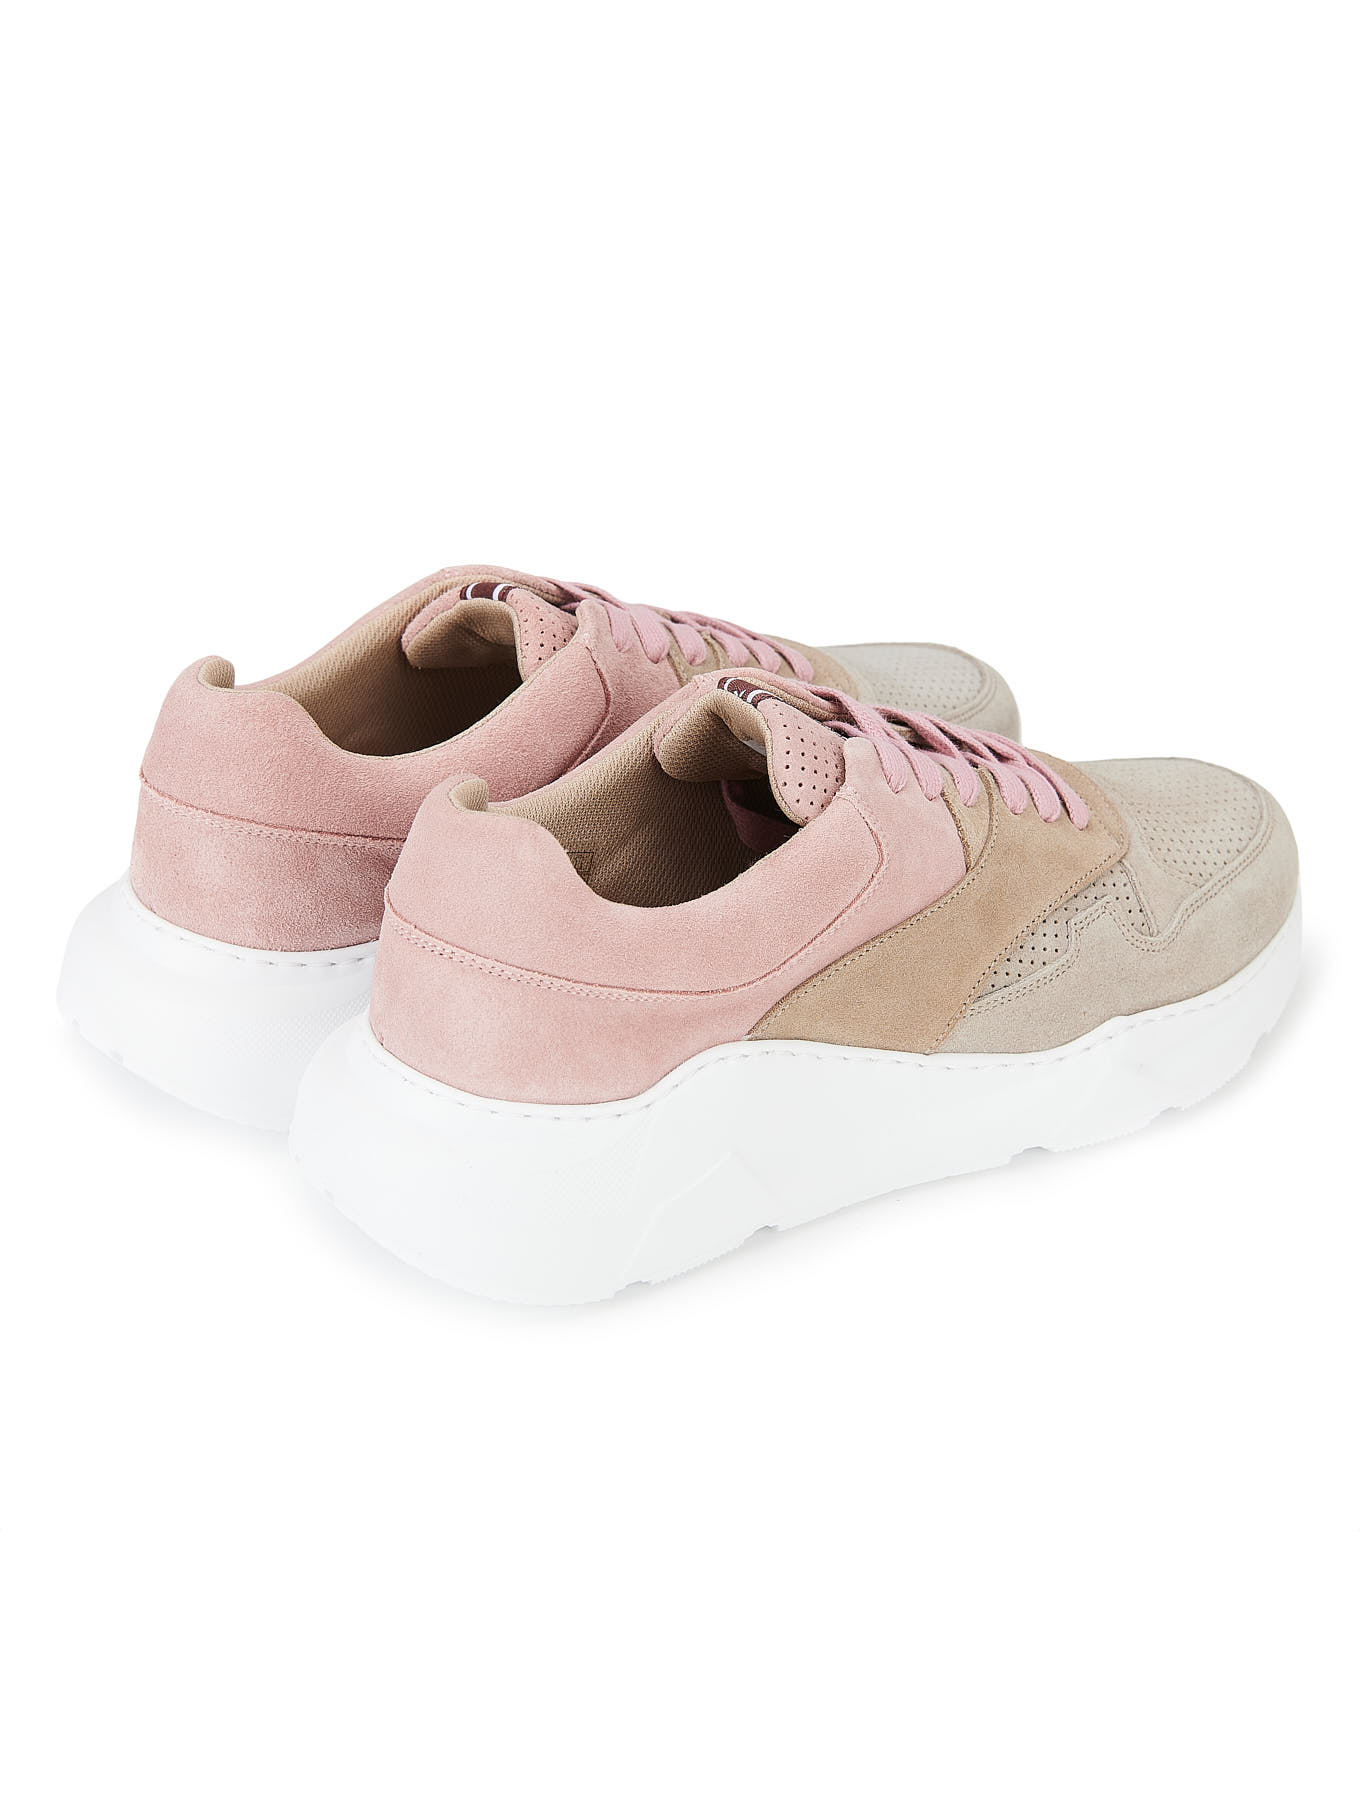 Tennis Pale Pink Casual Woman